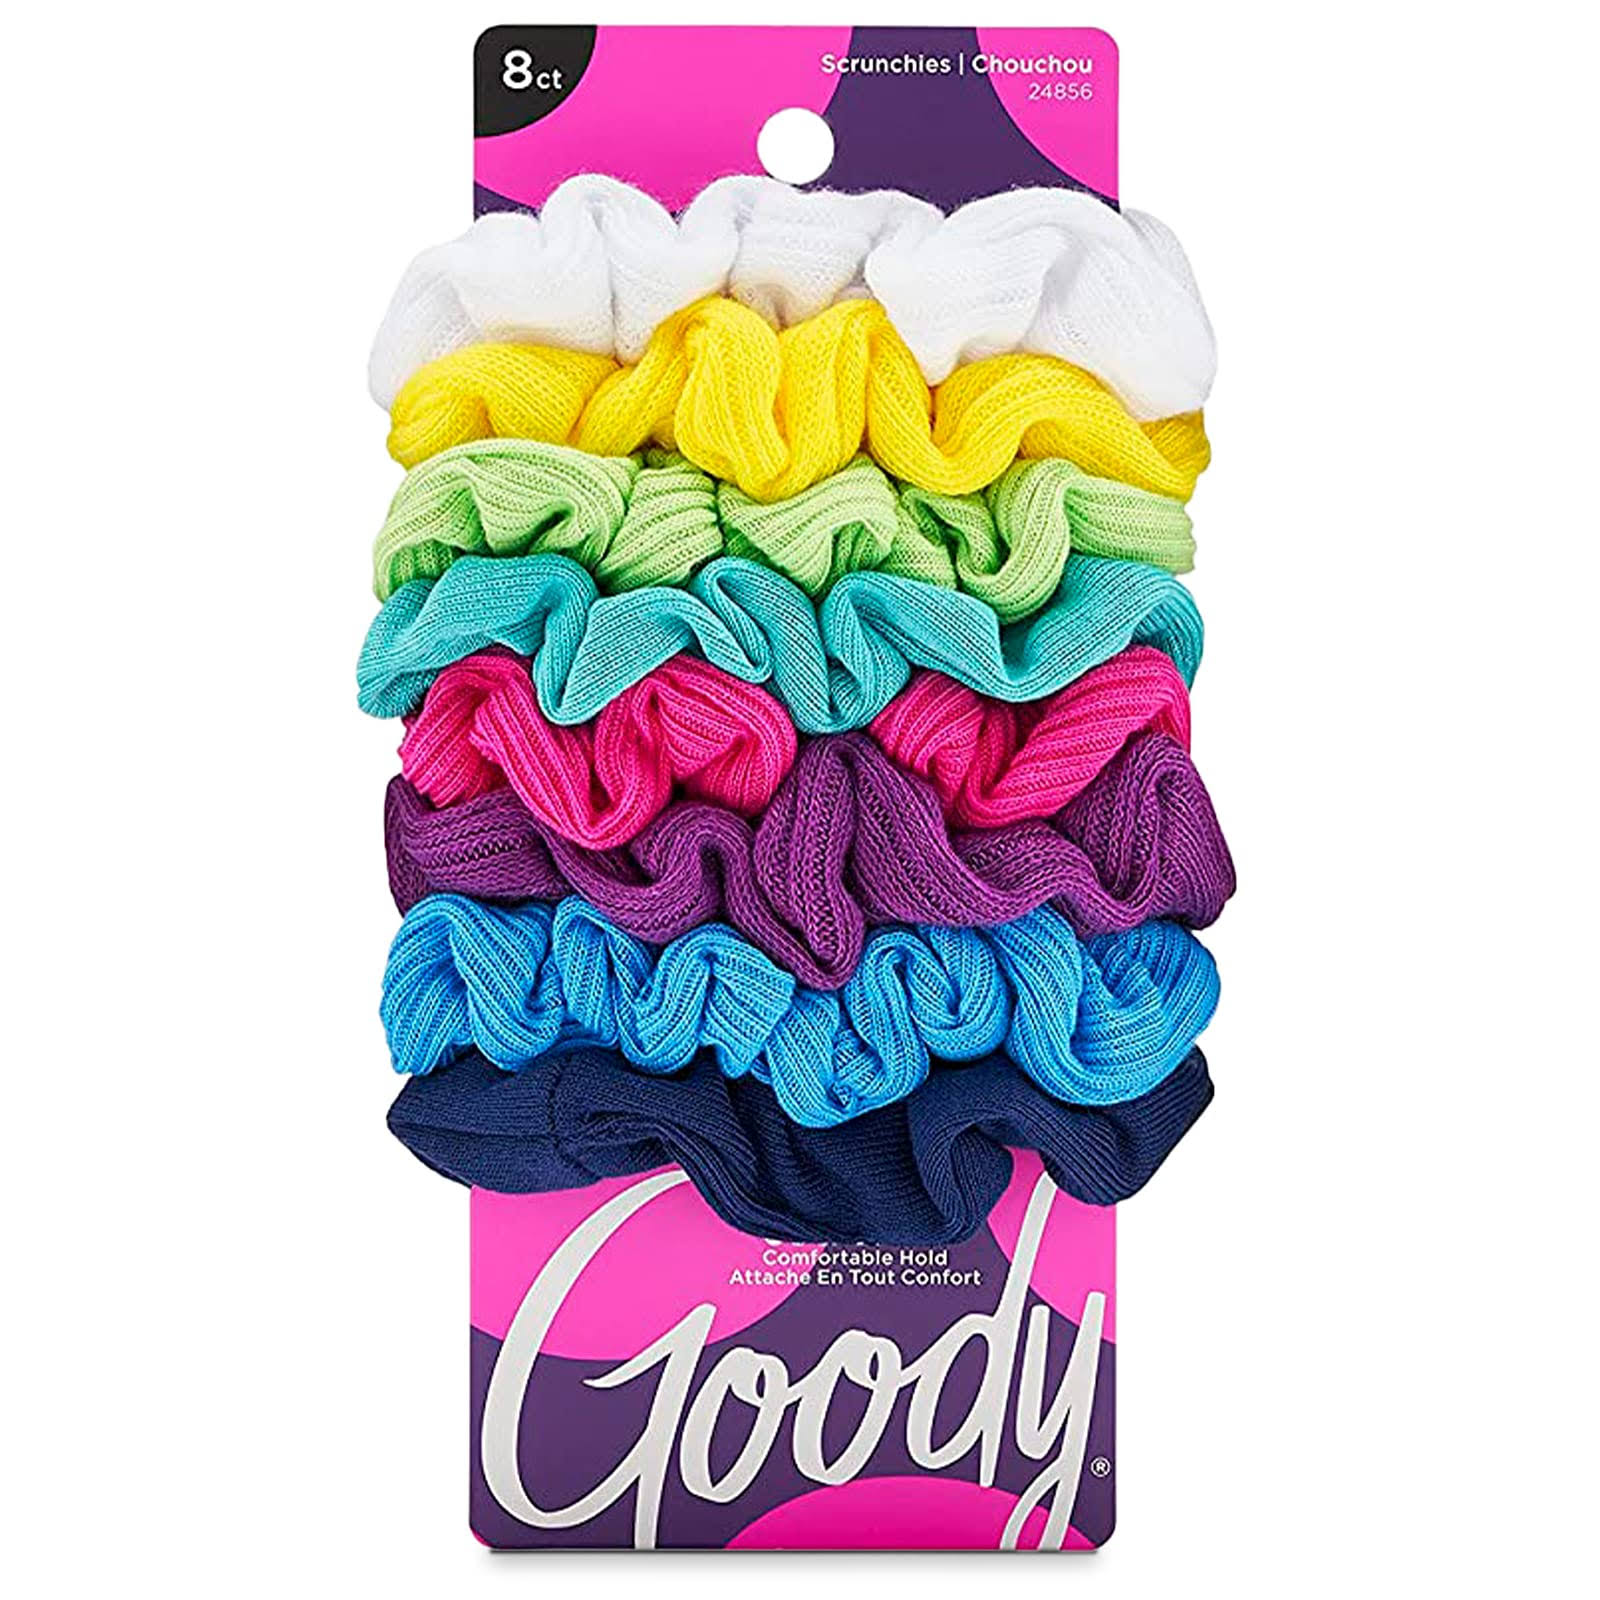 Goody Scrunchies - Assorted Colours, 1pk